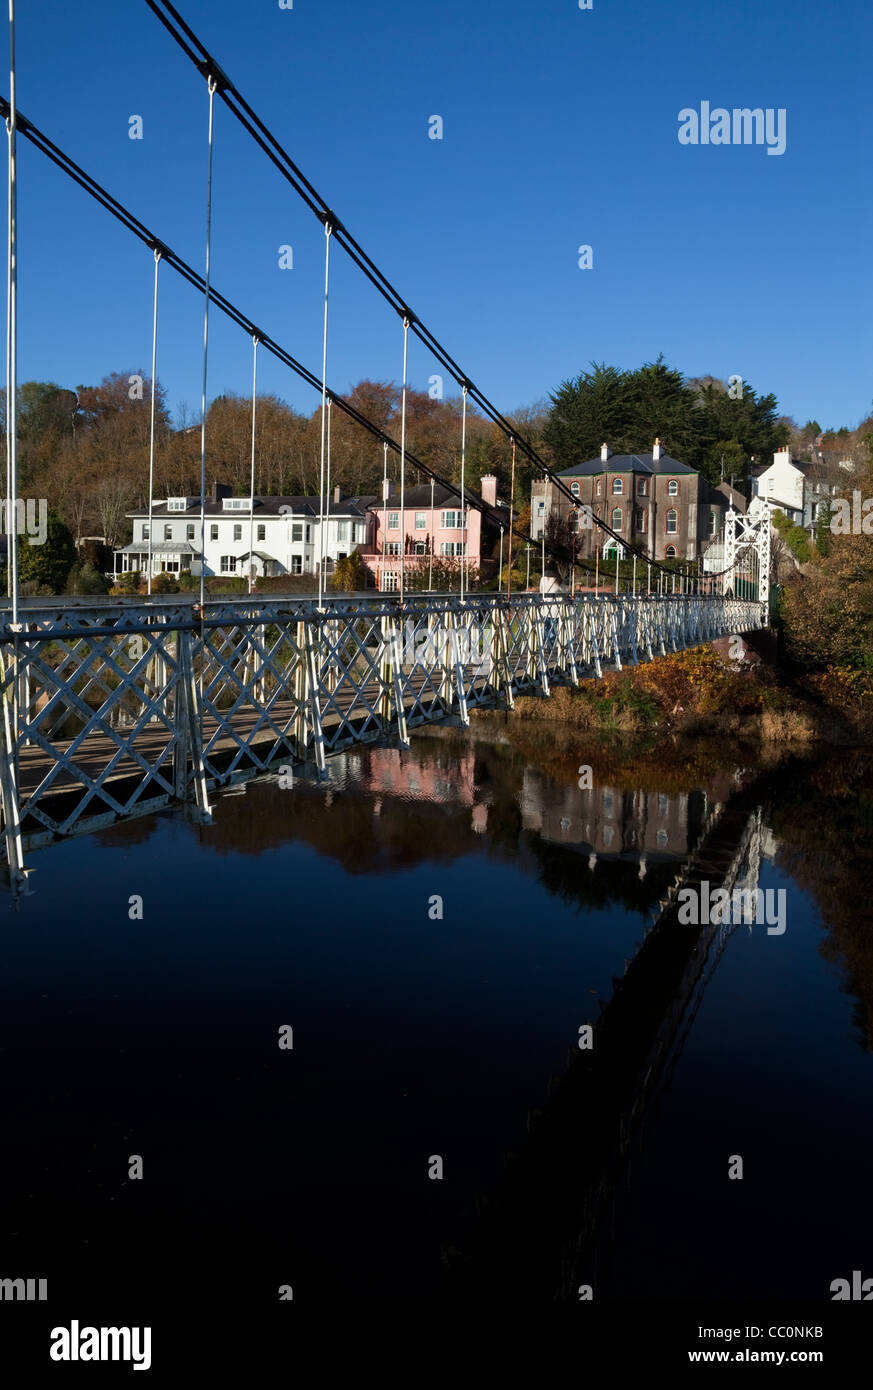 Daly's Suspension Bridge 1927 over the River Lee, Joins Sundays Well to the Mardyke, Cork City, Ireland. Stock Photo